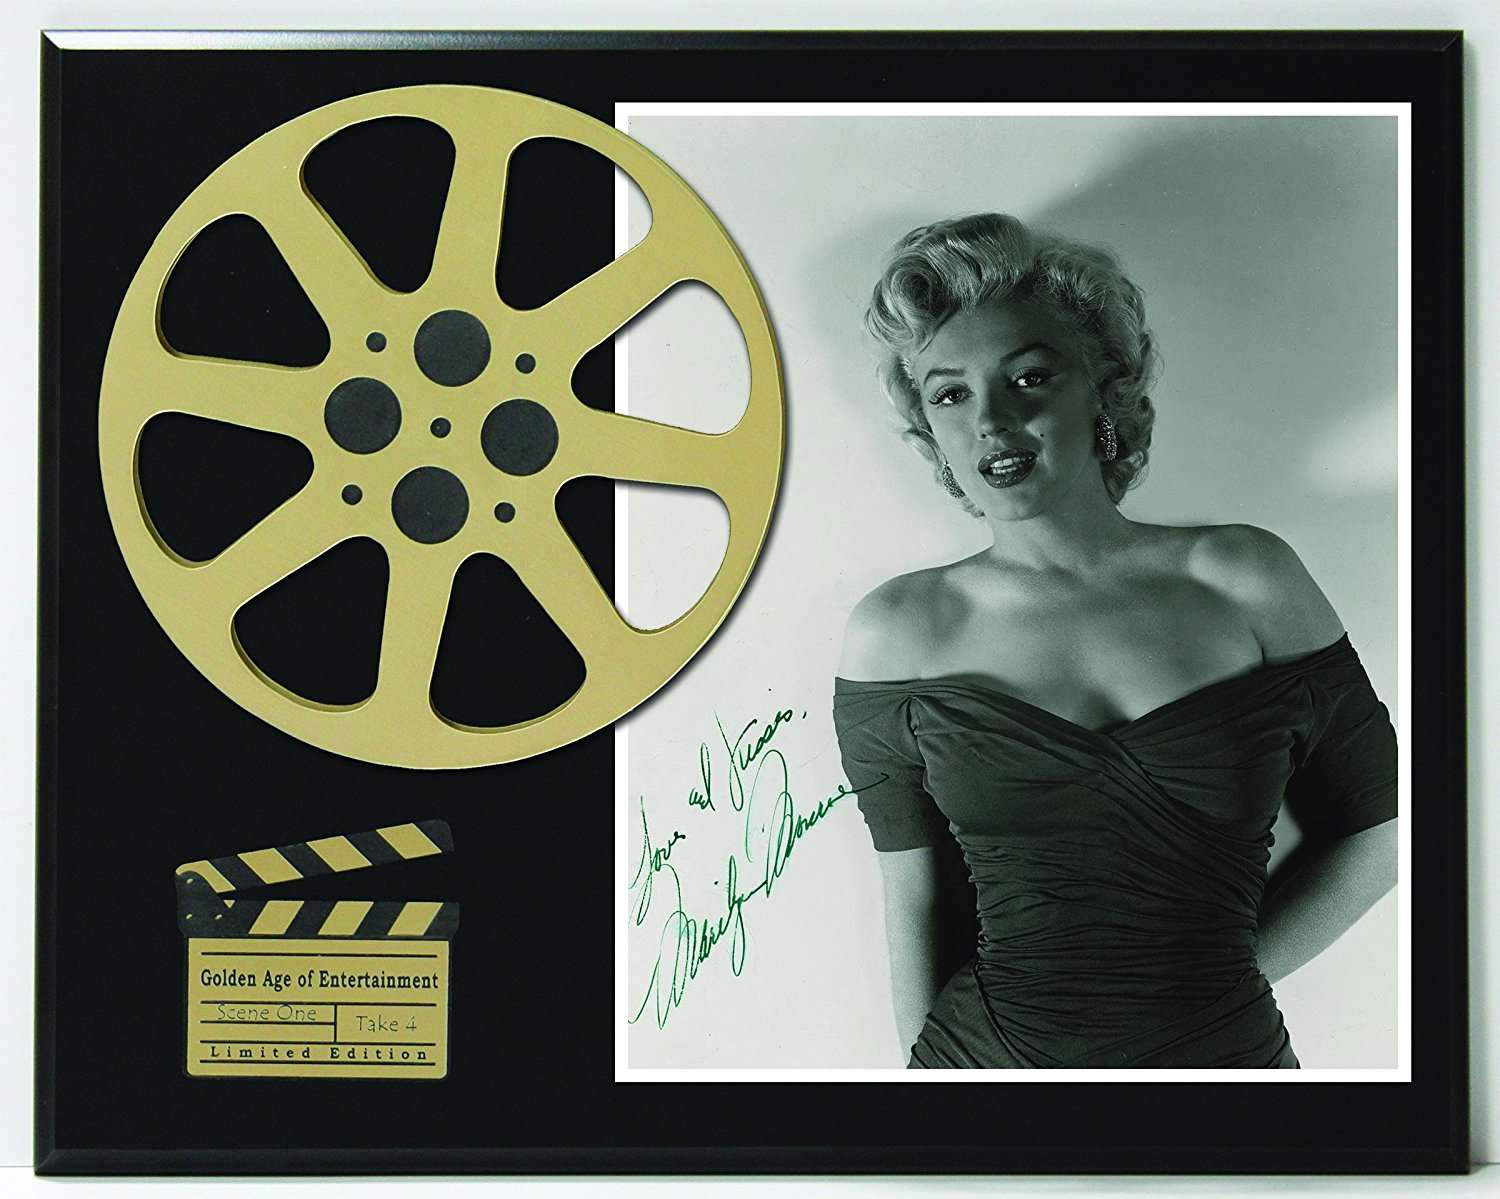 https://goldrecordoutlet.com/wp-content/uploads/imported/Marilyn-Monroe-Limited-Edition-Reproduction-Autographed-Movie-Reel-Display-K1-B01M4LWS26.jpg